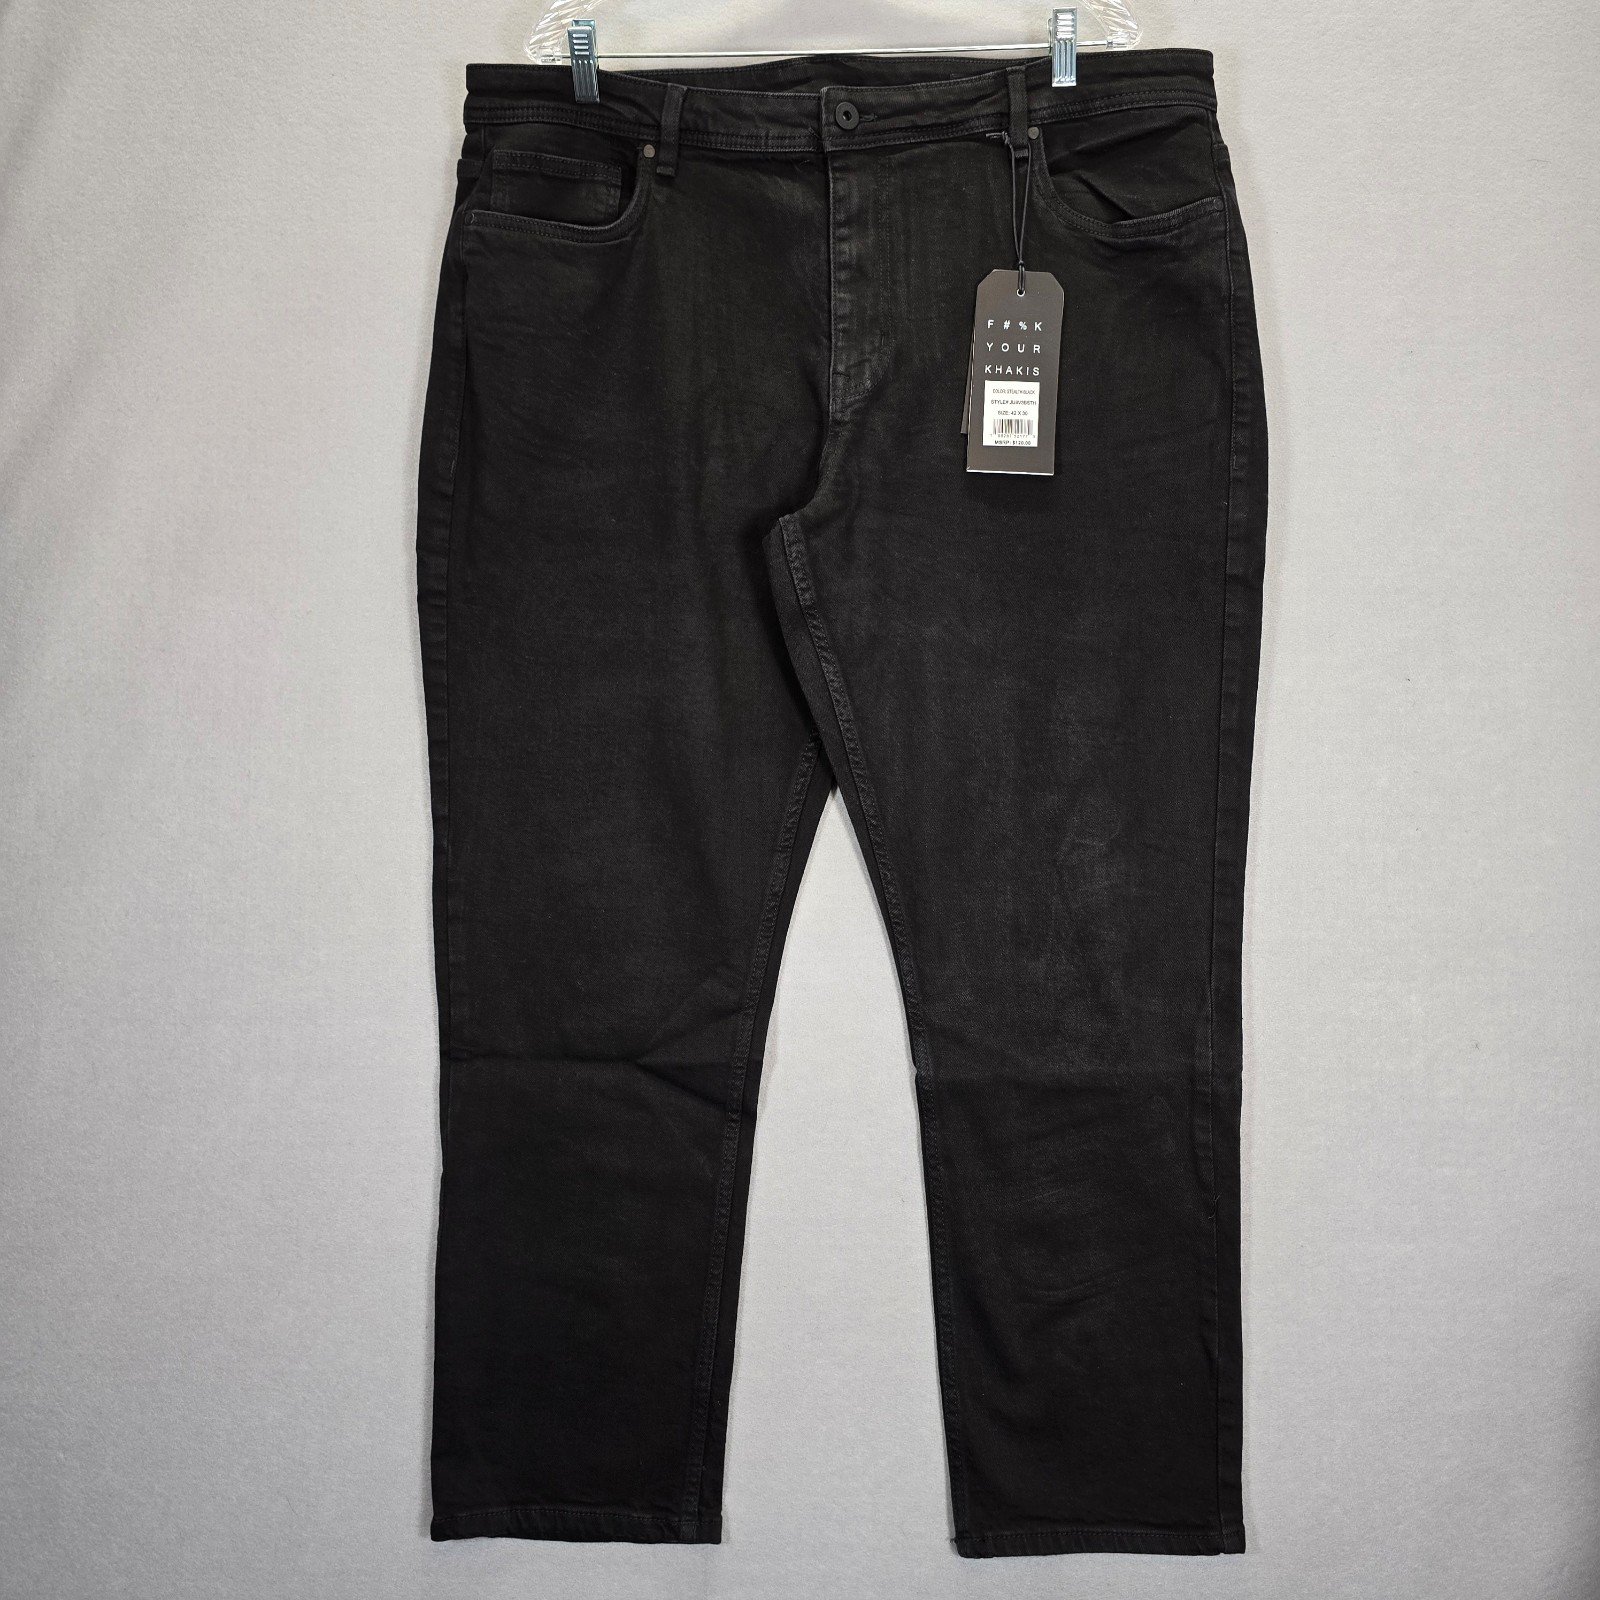 NYC The Perfect Jean Men’s Athletic Fit Stealth - Black  Size 42 X 30 NEW eN87fL3RS